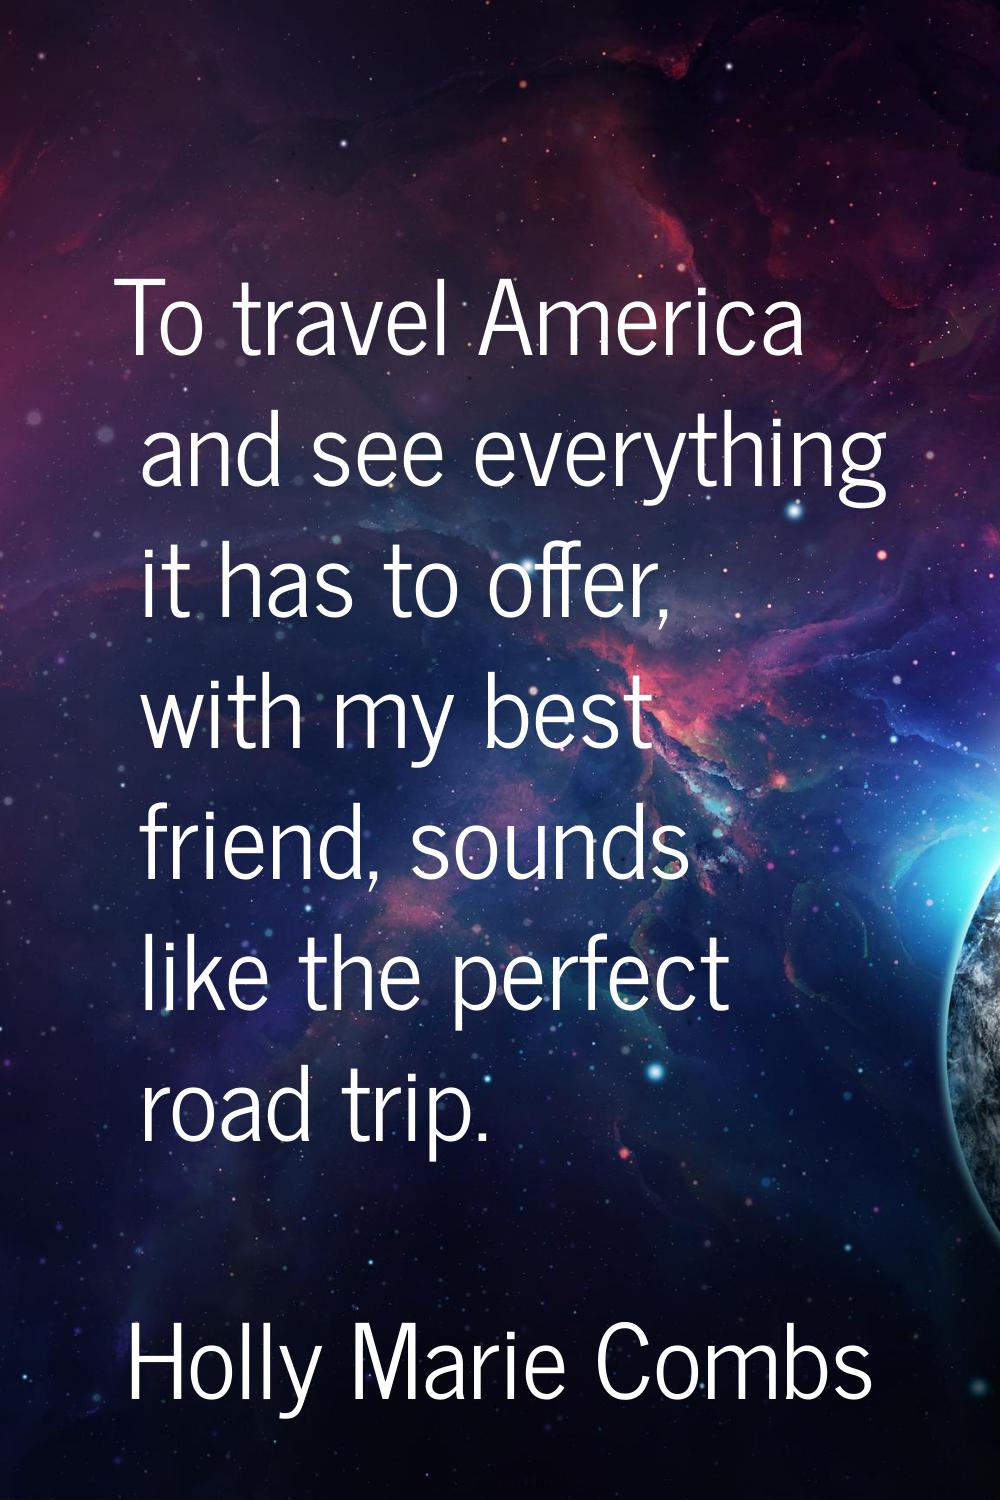 To travel America and see everything it has to offer, with my best friend, sounds like the perfect 